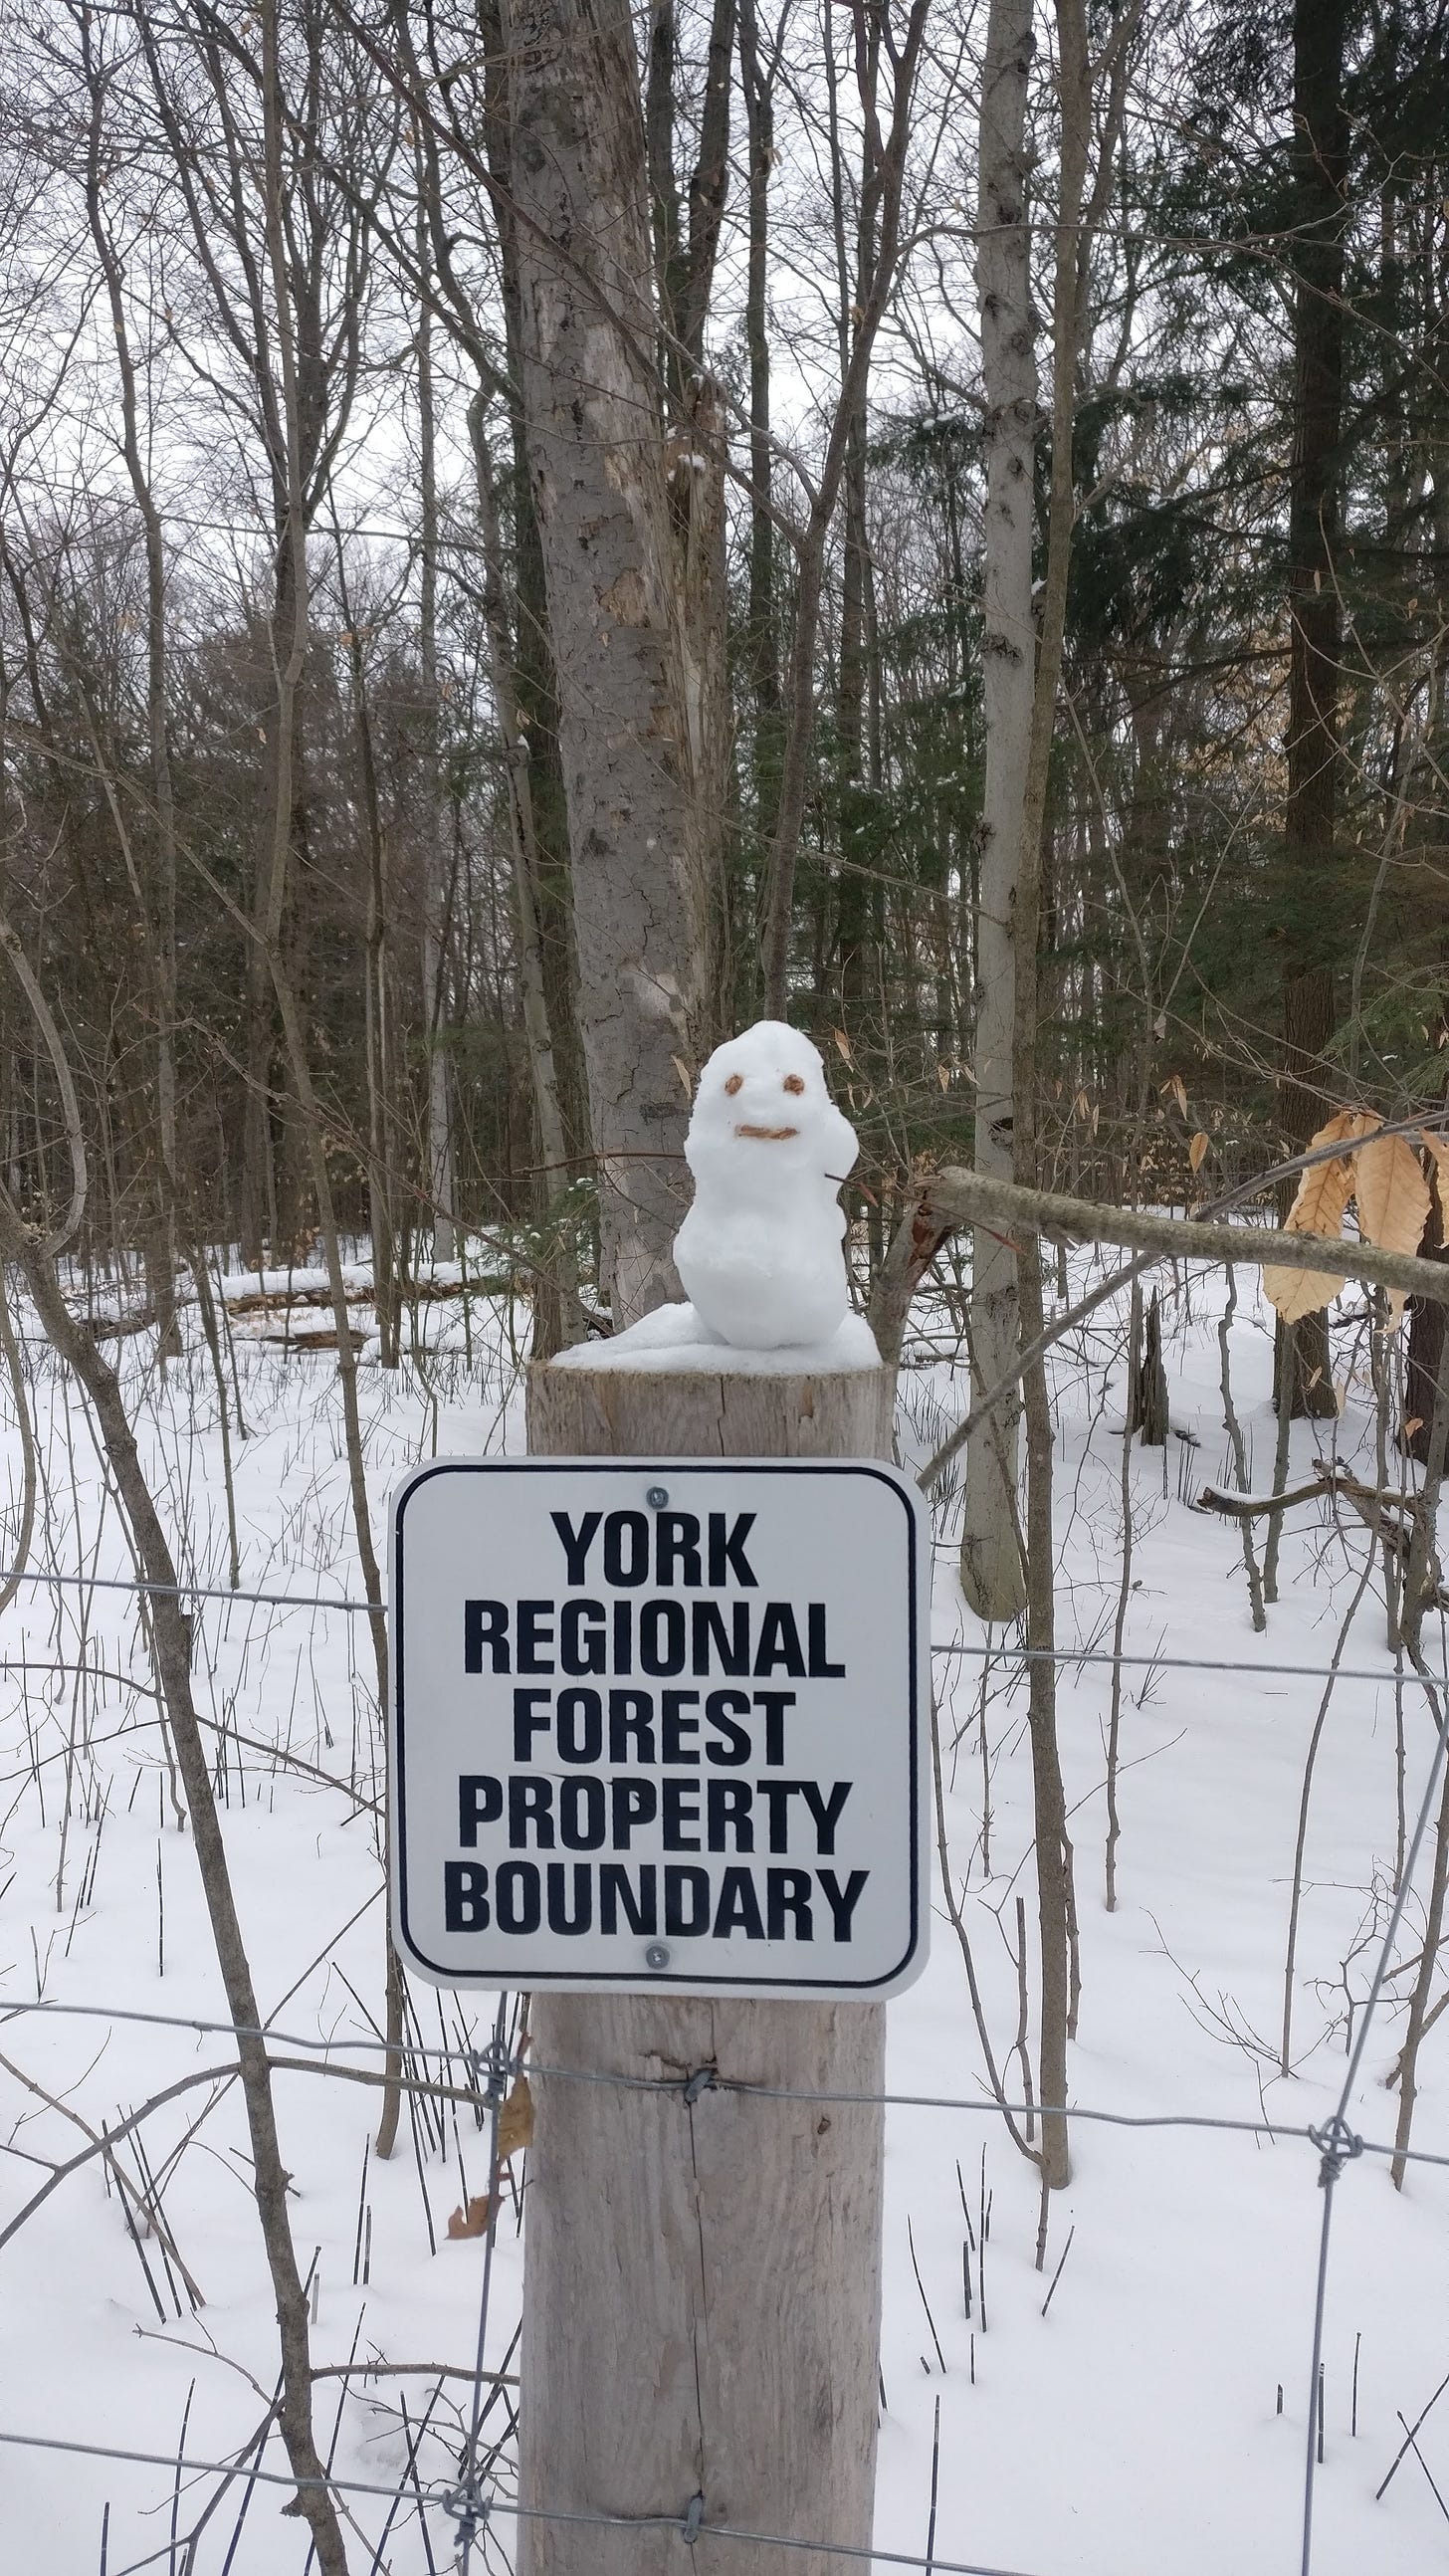 A teeny tiny snowman on a fencepost above a sign marking the park boundary